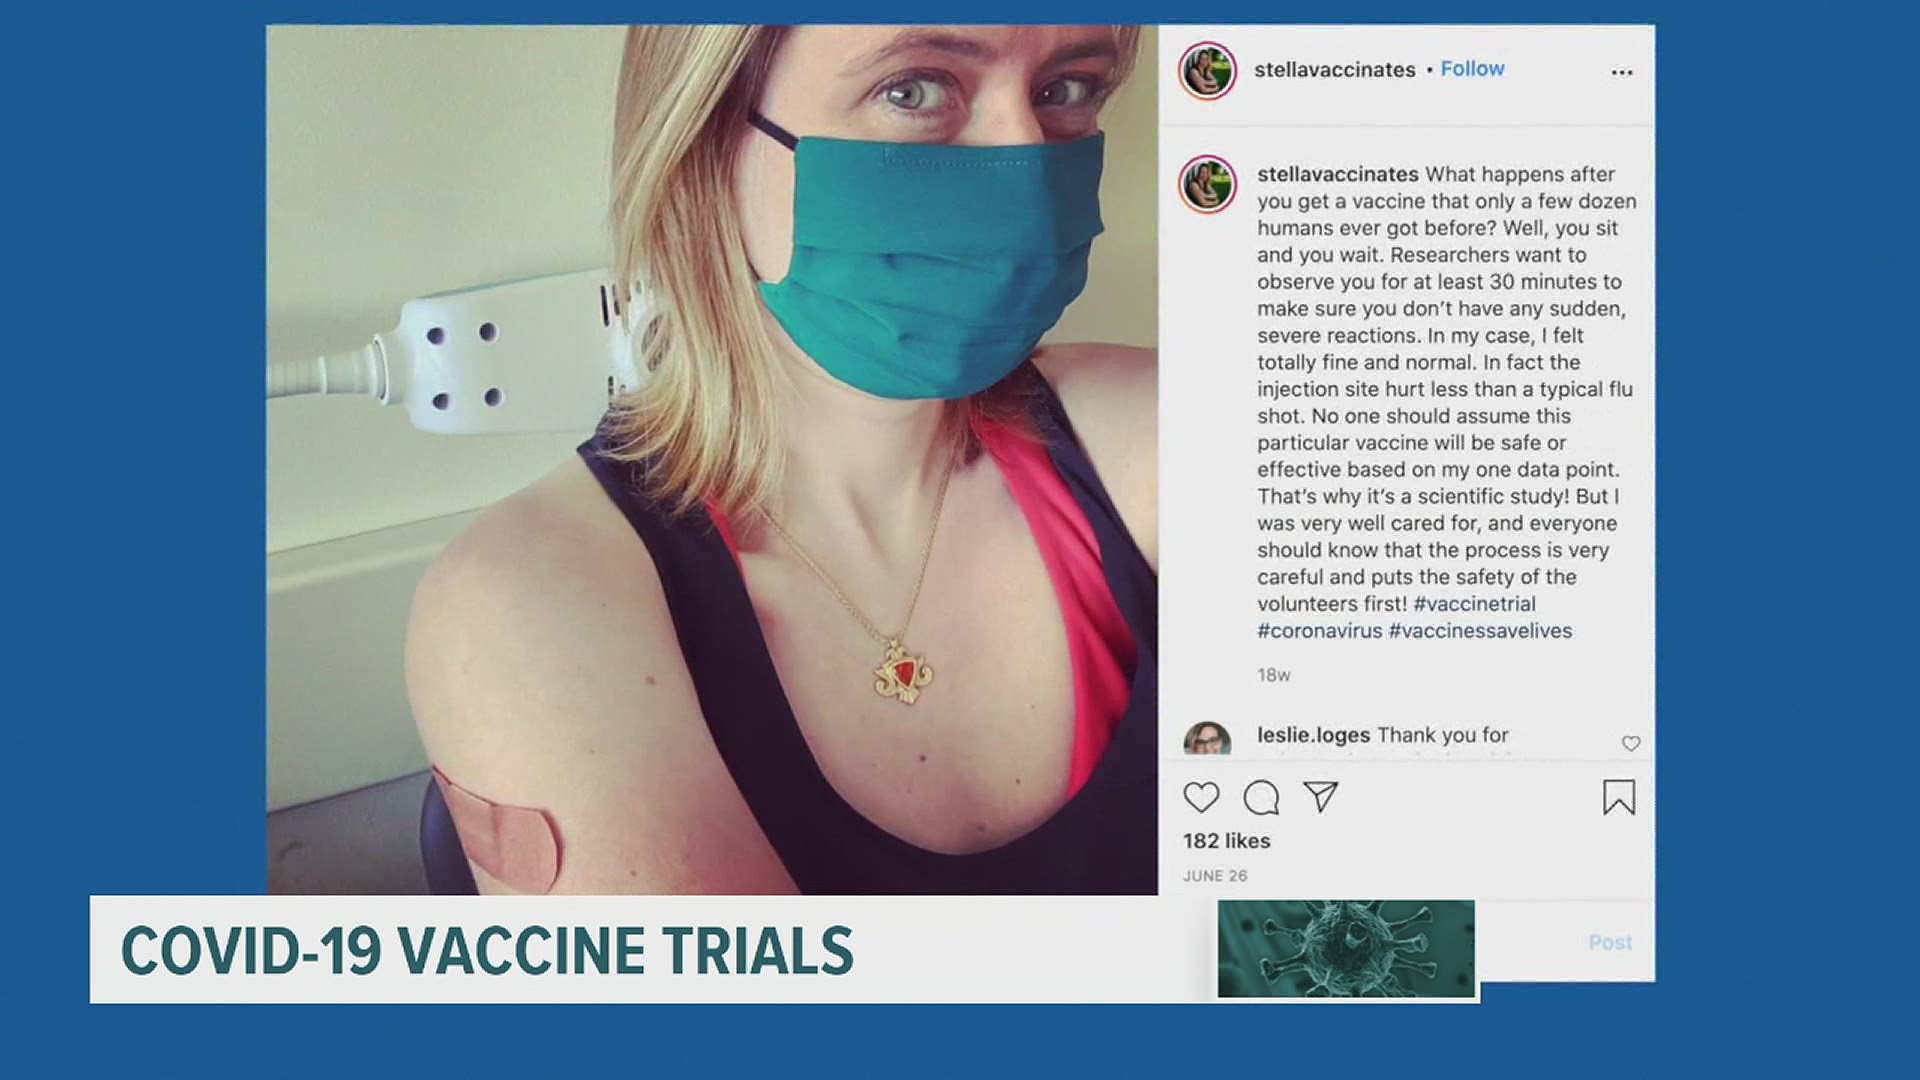 Would you sign up for a vaccine trial? One Lancaster woman shares her experience with the DNA vaccine trial from Penn Medicine.